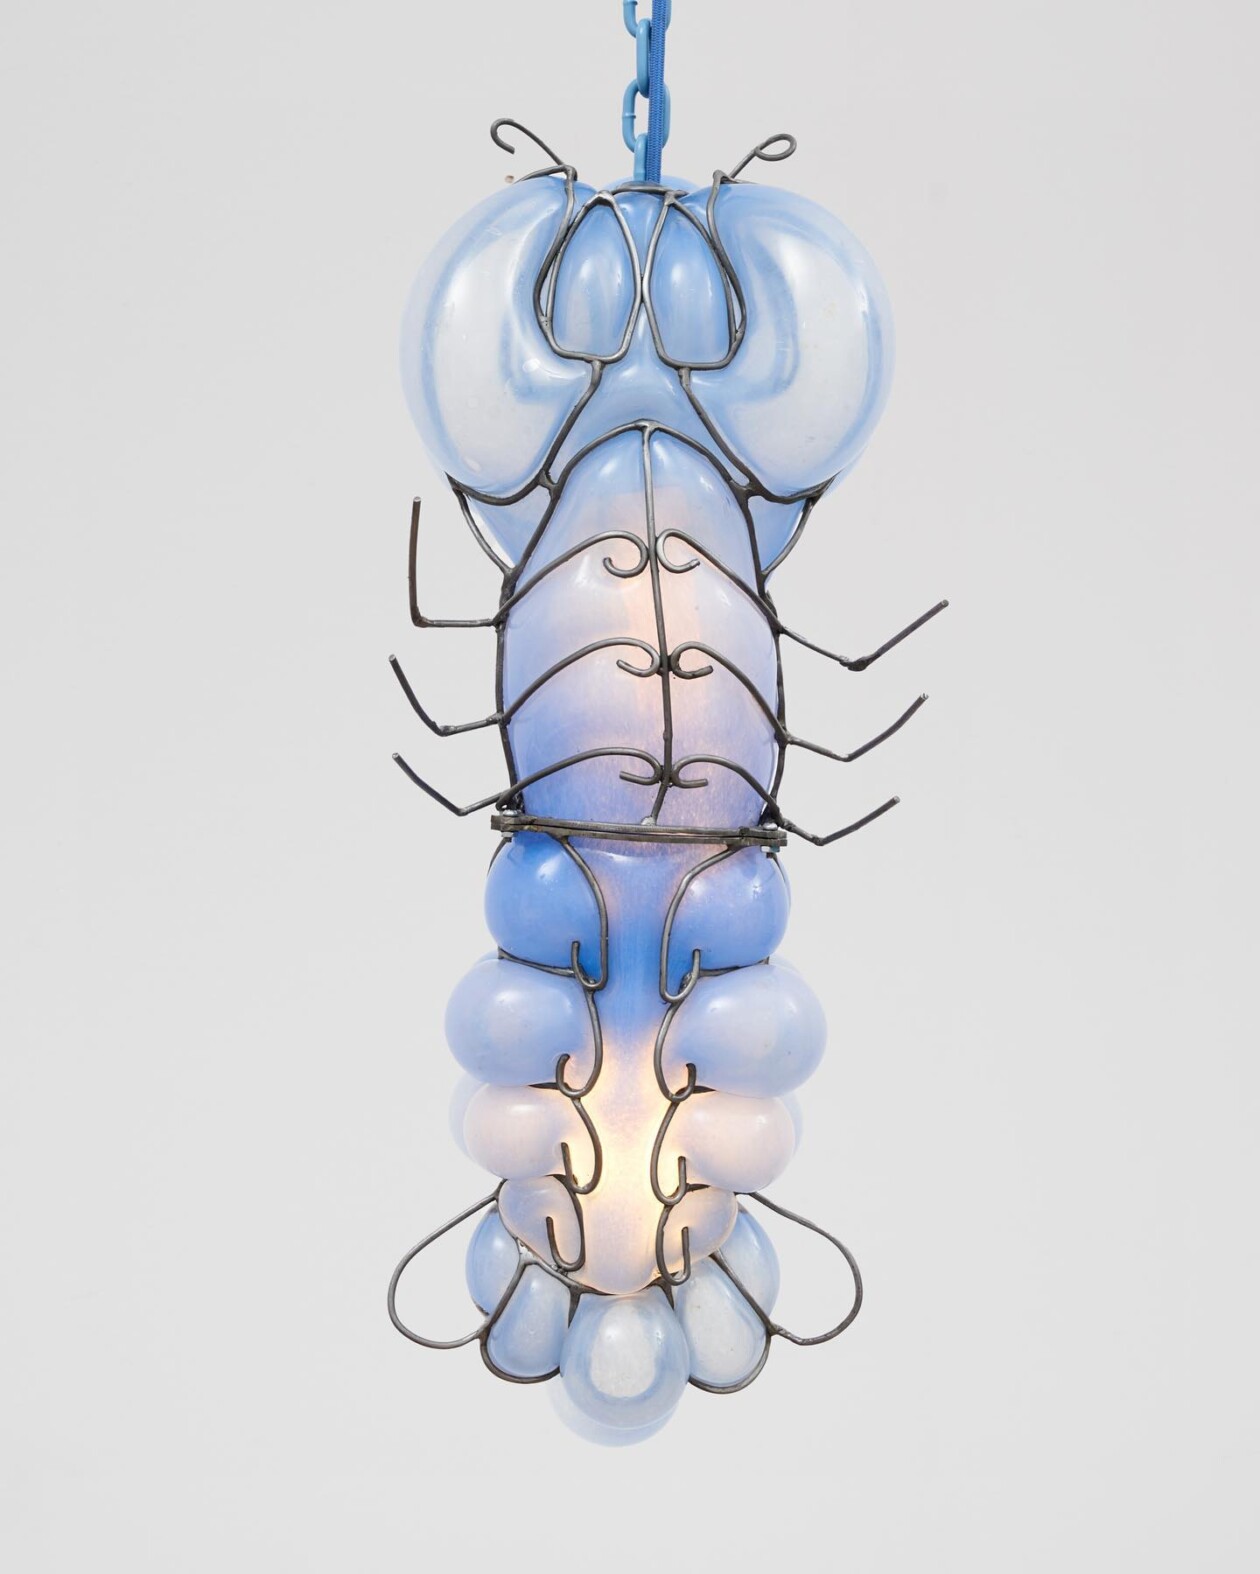 Sculptural Glass Pendants Of Otherworldly Blob Creatures By Katie Stout (2)